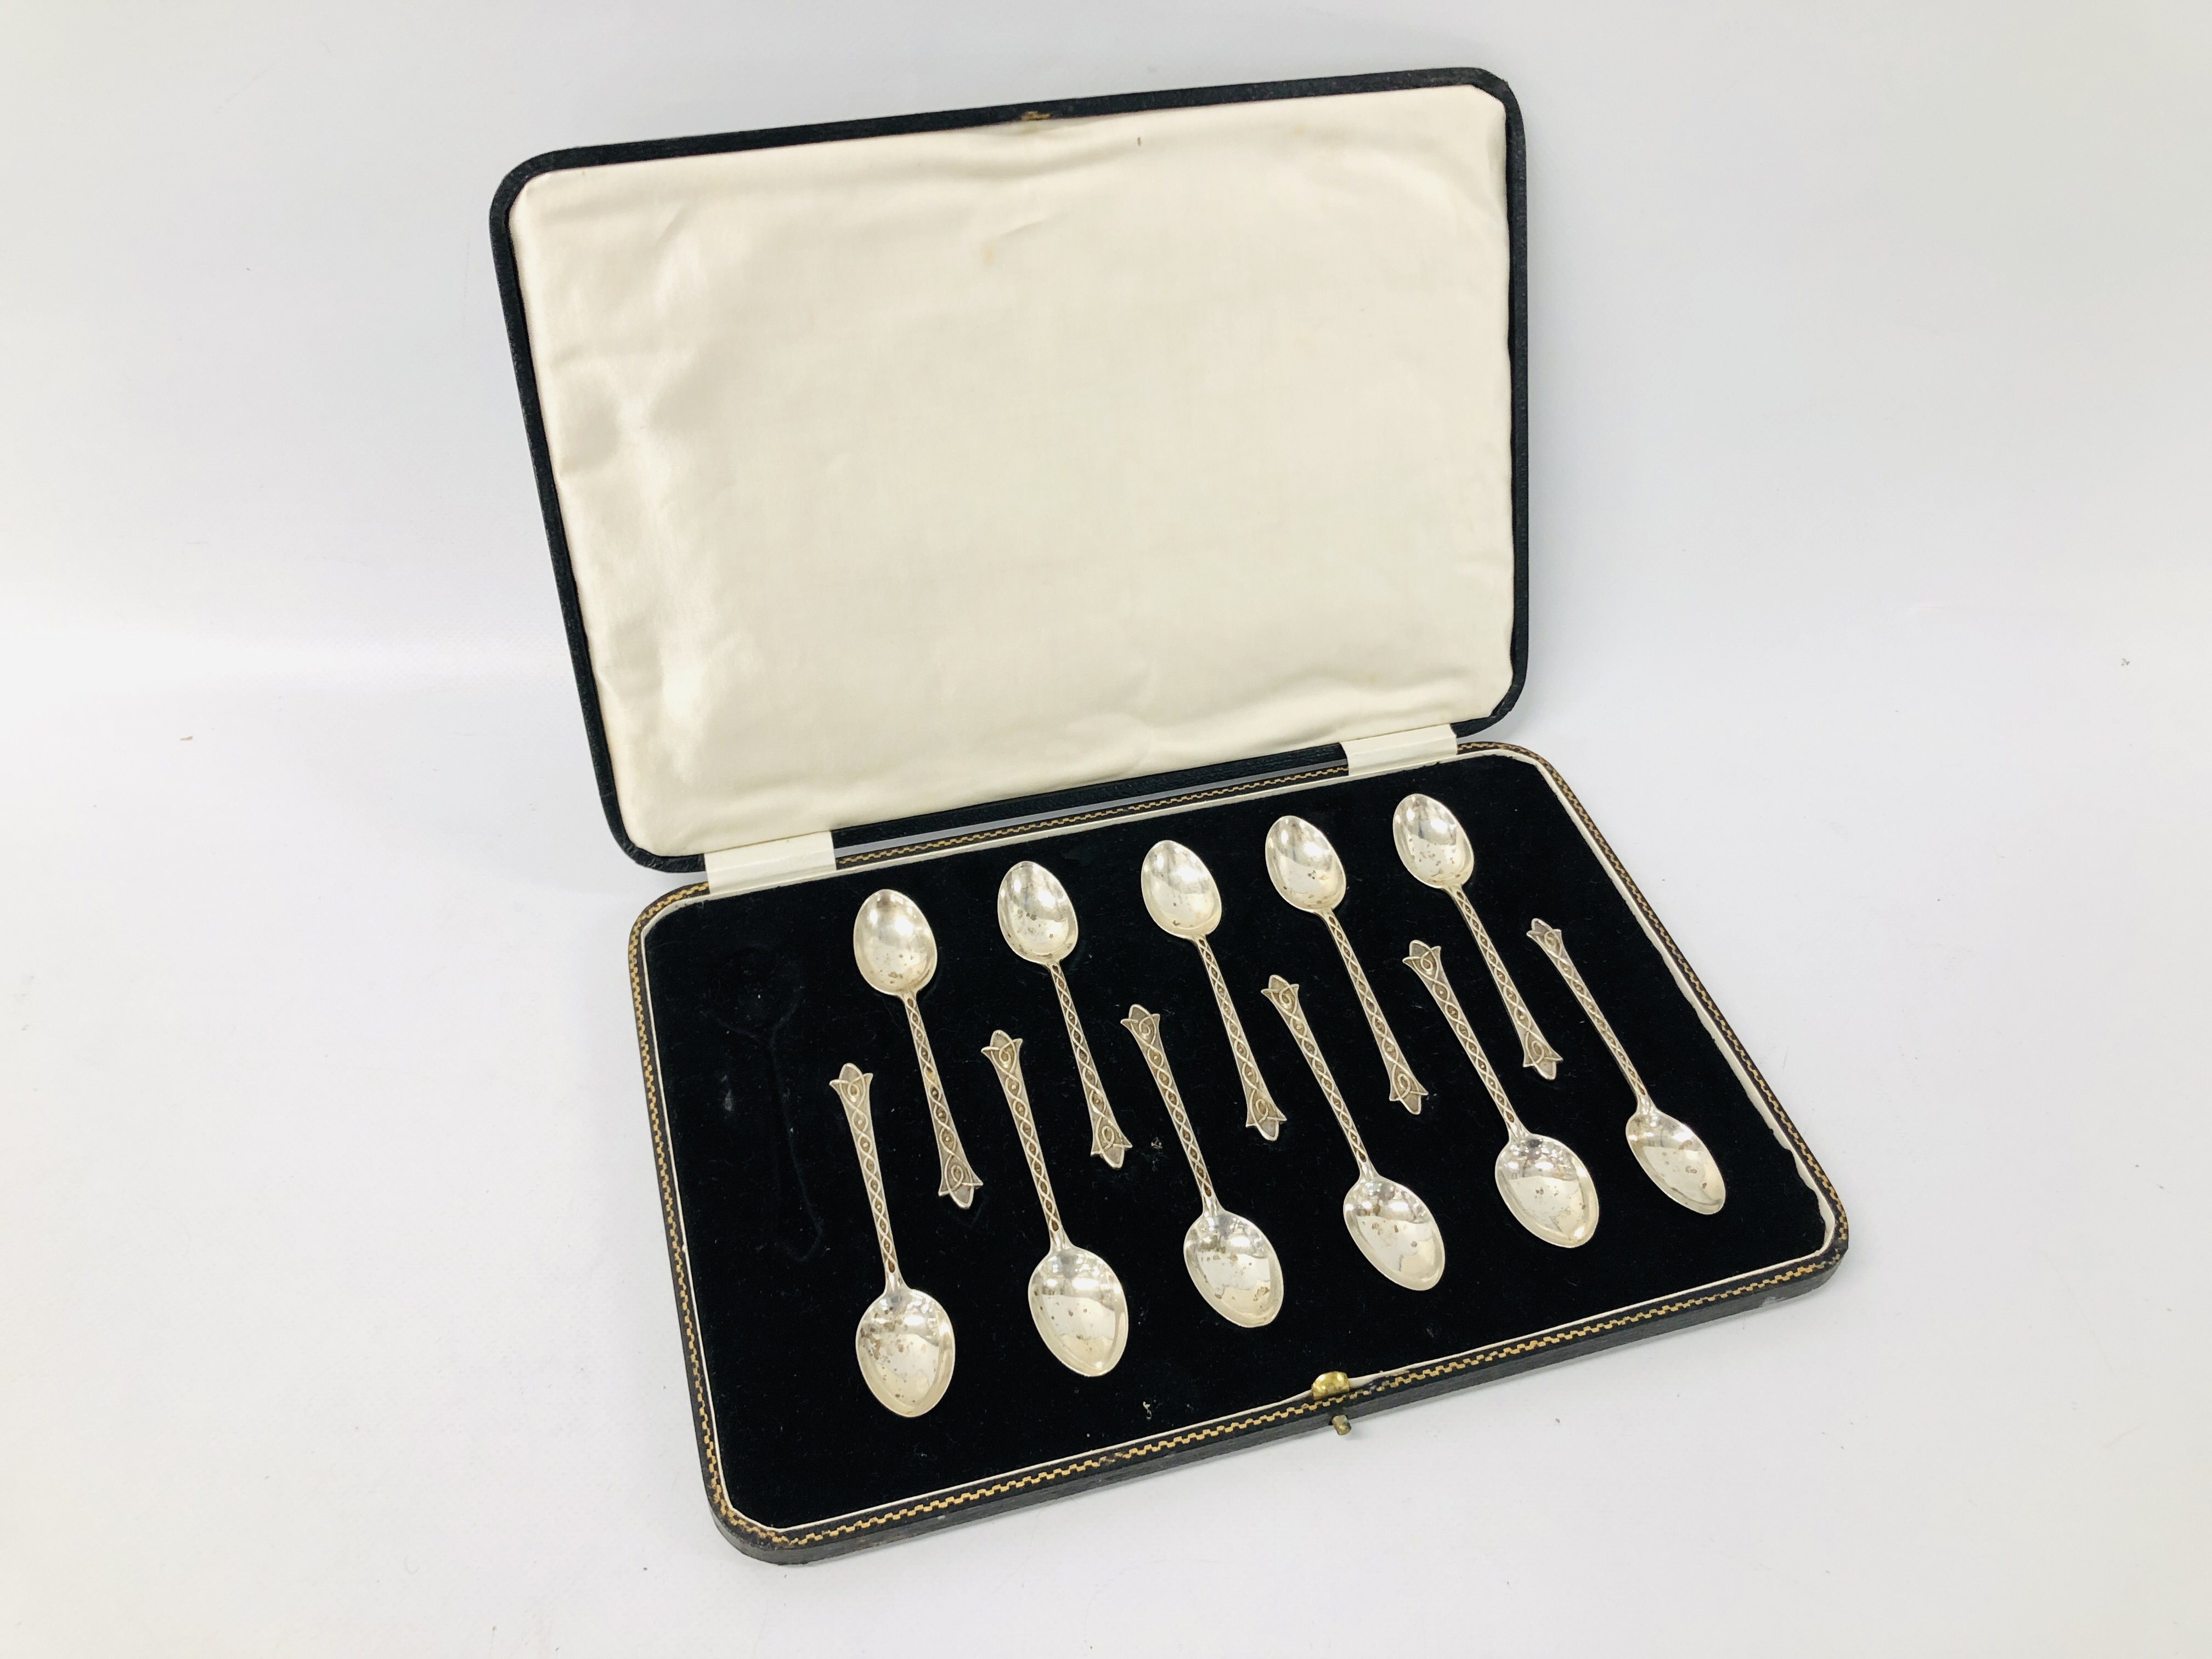 A CASE CONTAINING ELEVEN SILVER TEASPOONS STAMPED C.E.